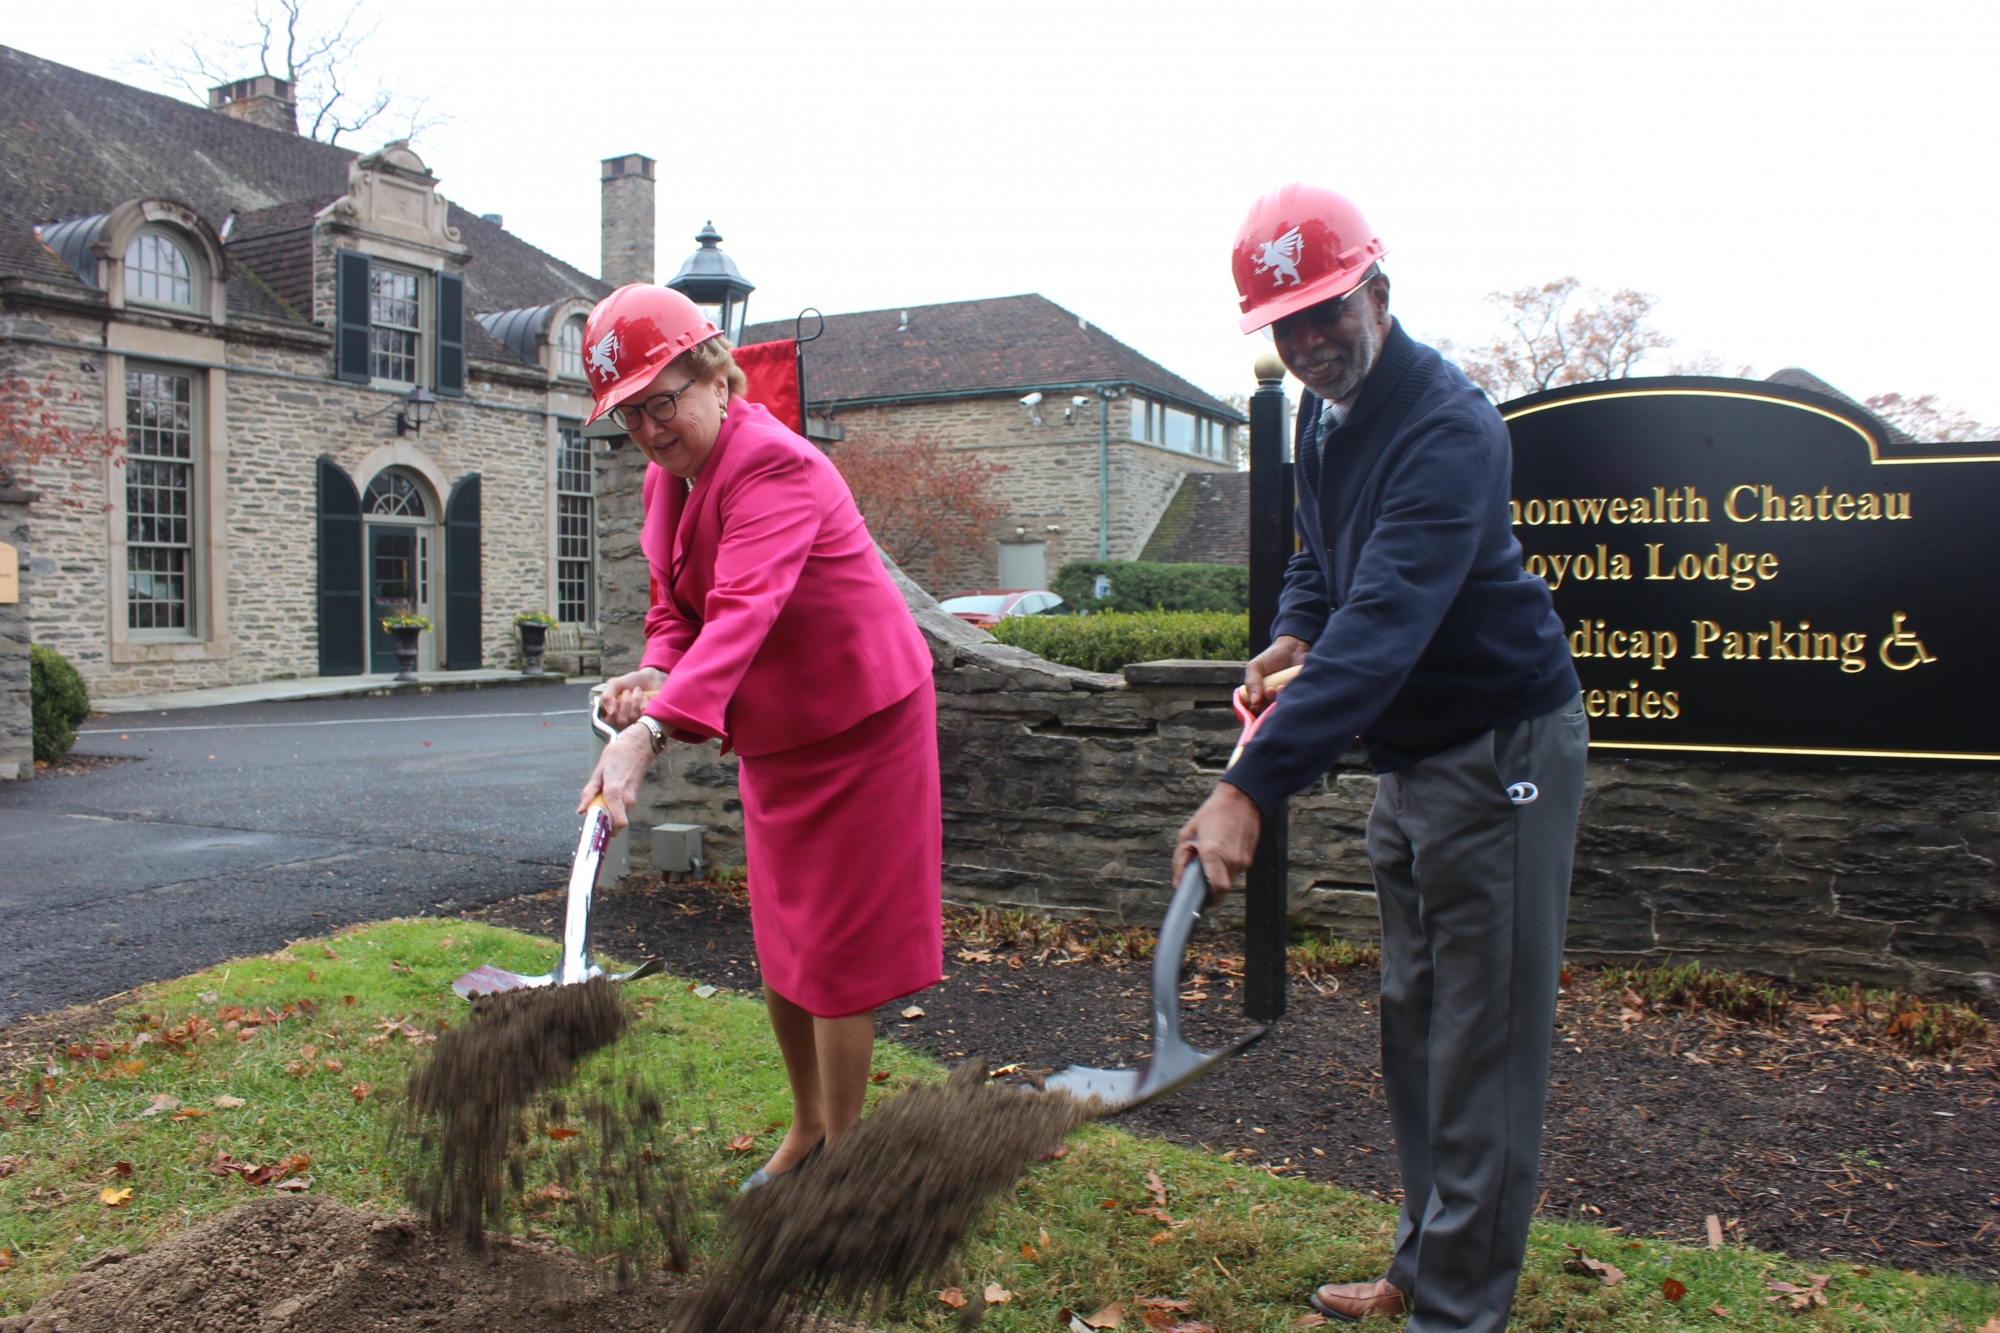 Sister Carol Jean Vale was joined by State Sen. Art Haywood in helping break ground on the new SugarLoaf entrance.